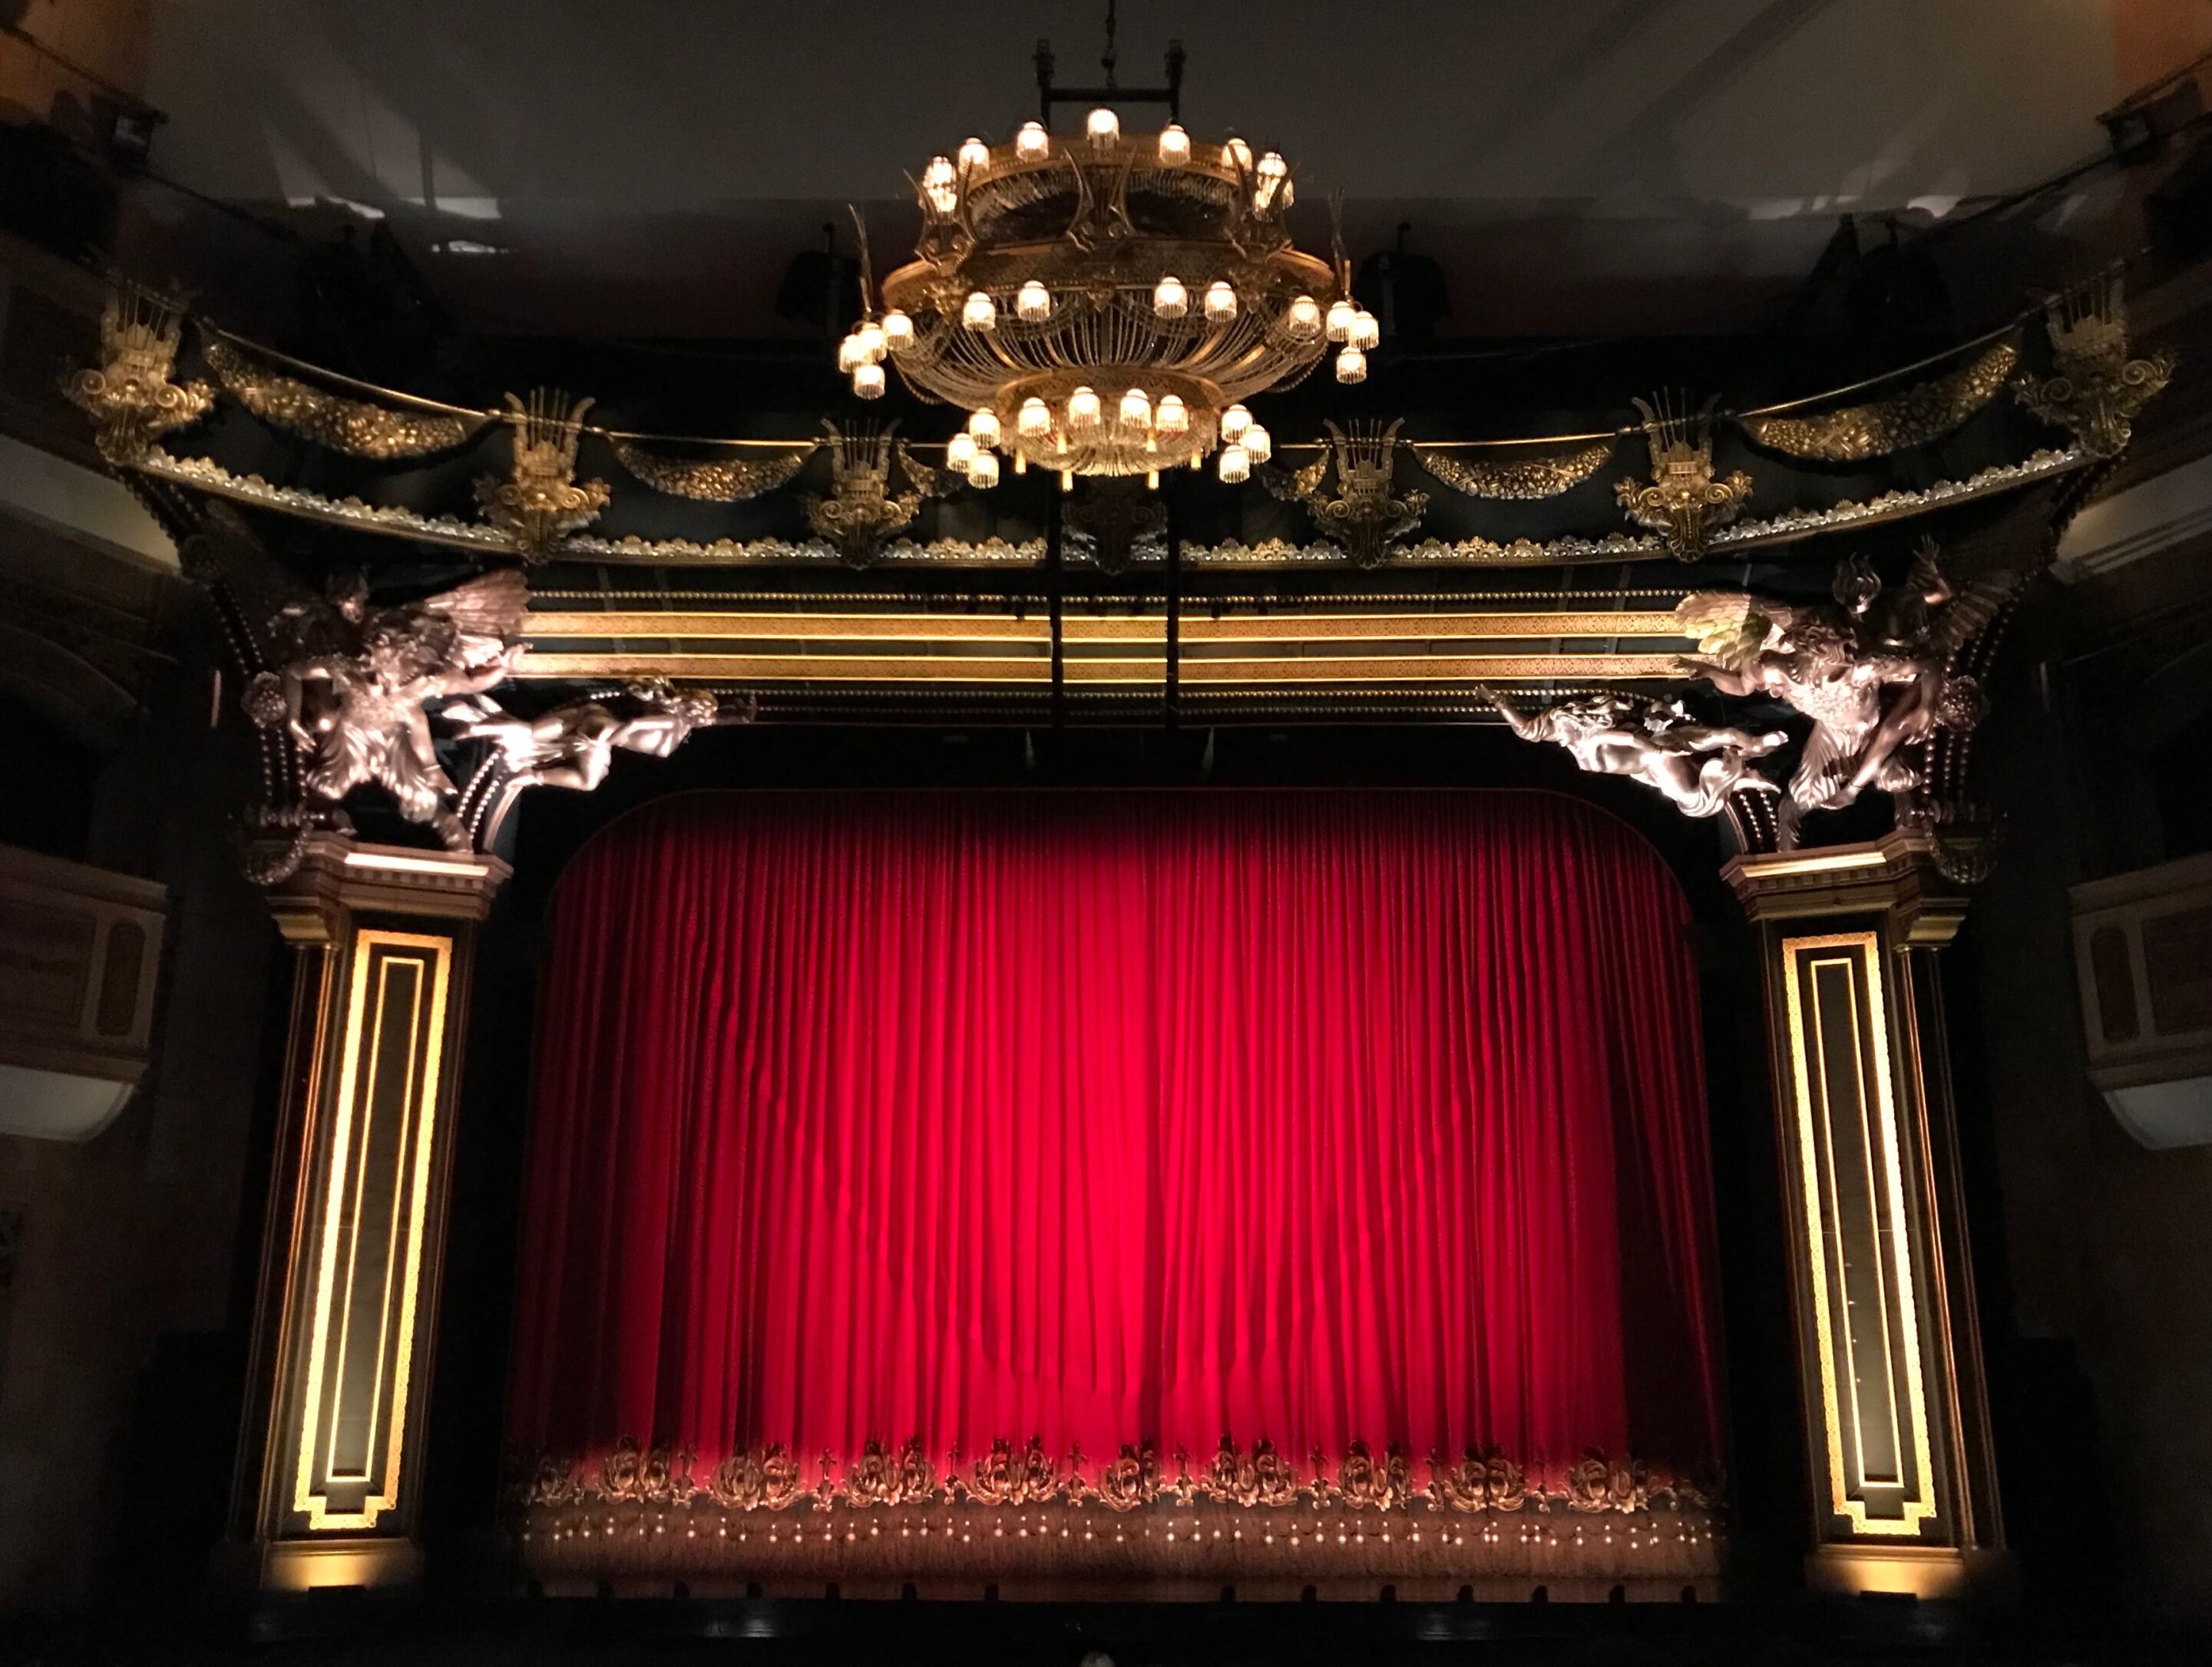 West End Theatres